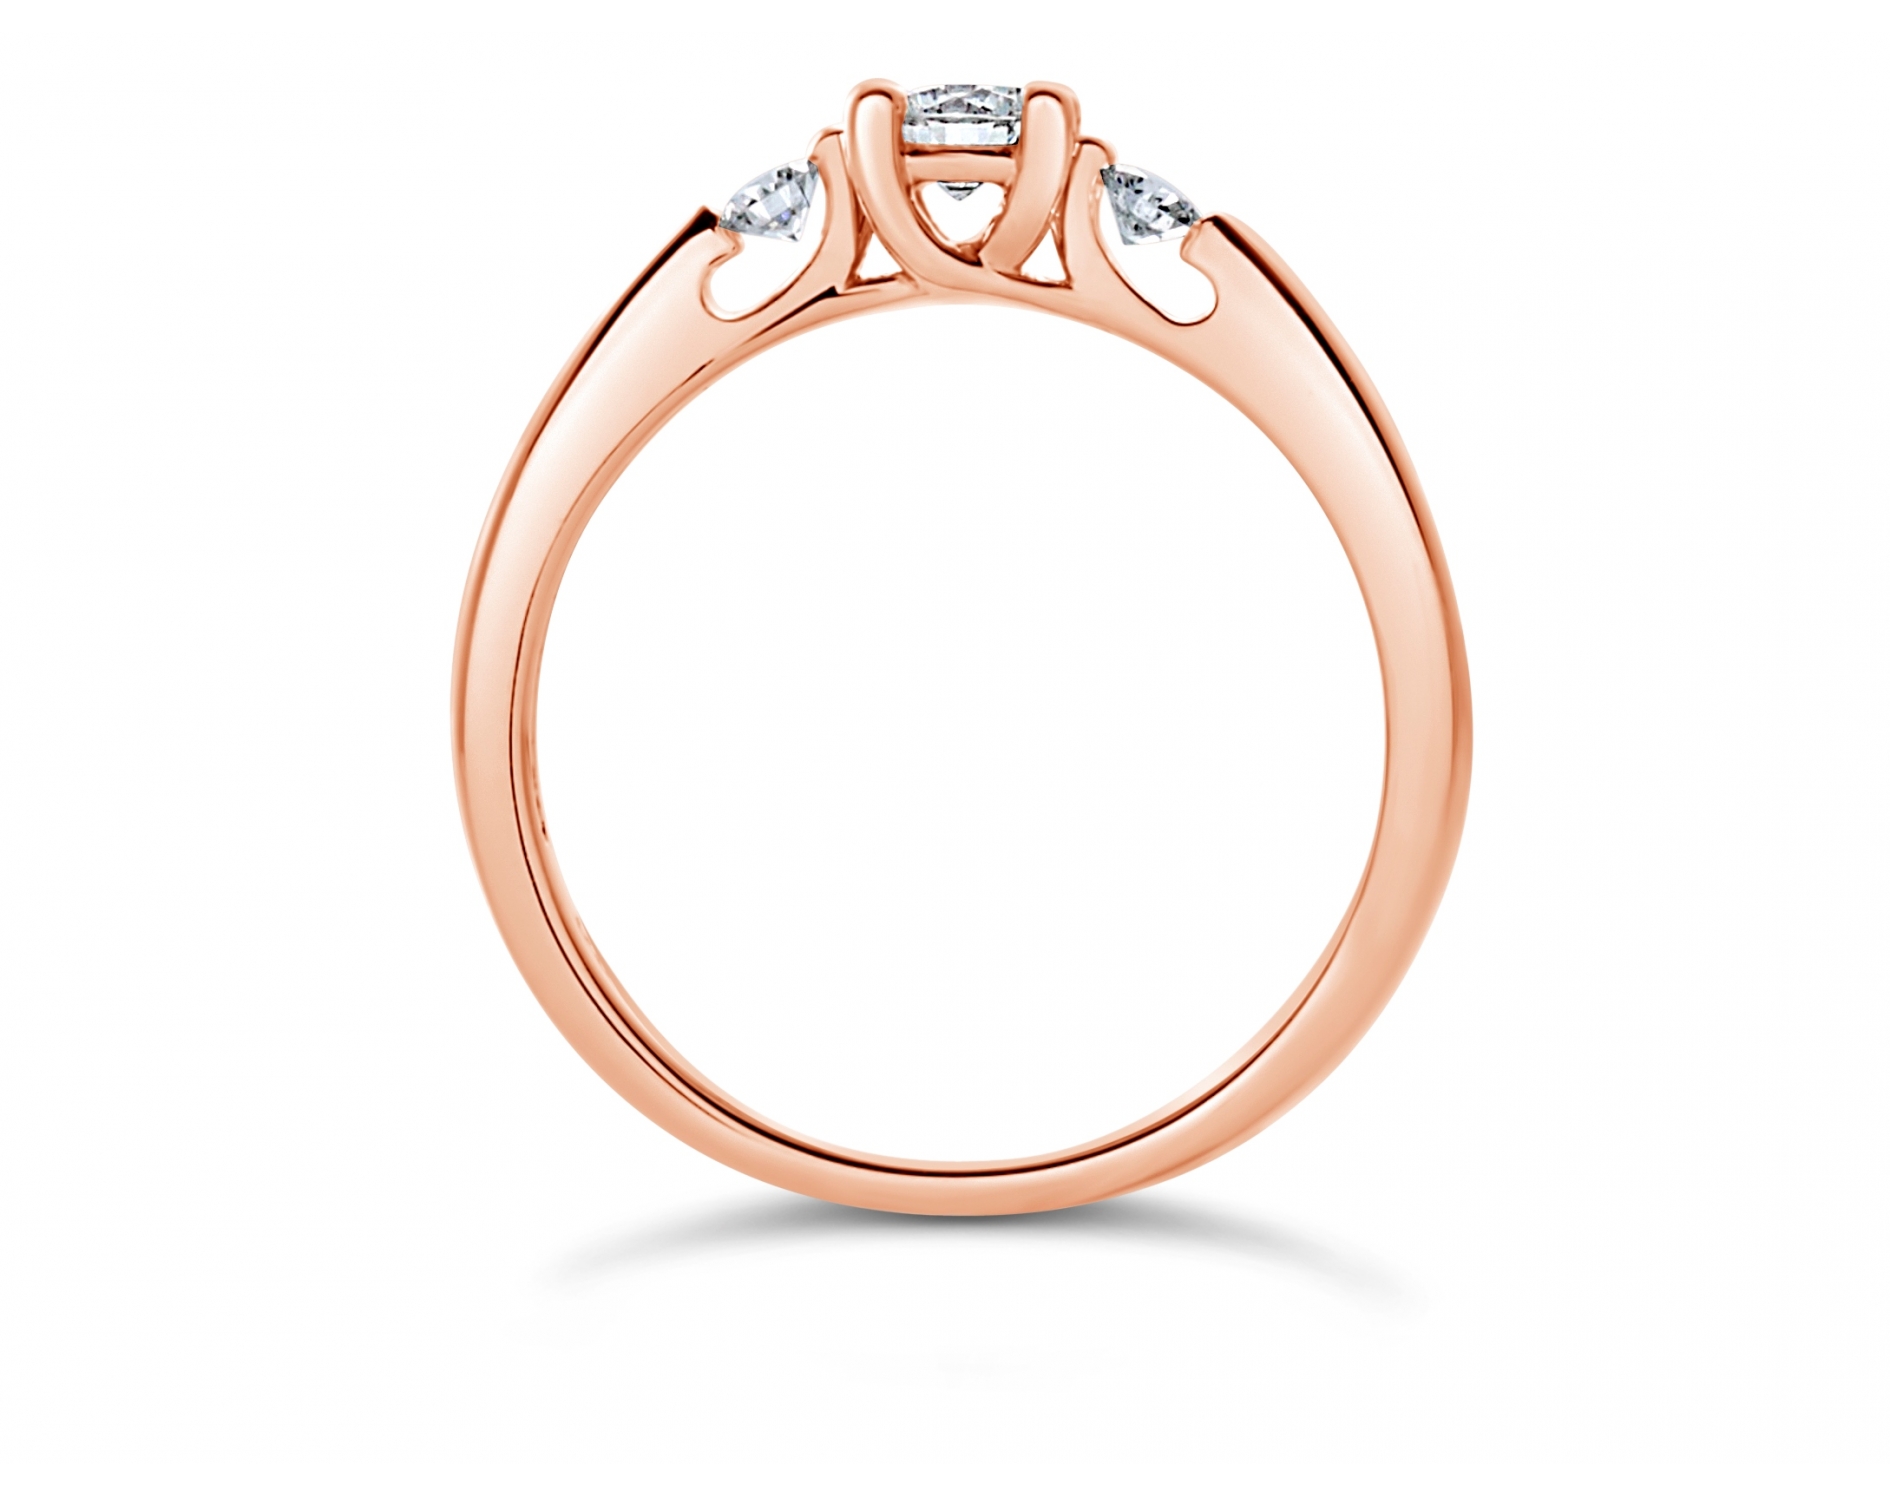 18k rose gold 4 prong open gallery three stone engagement ring